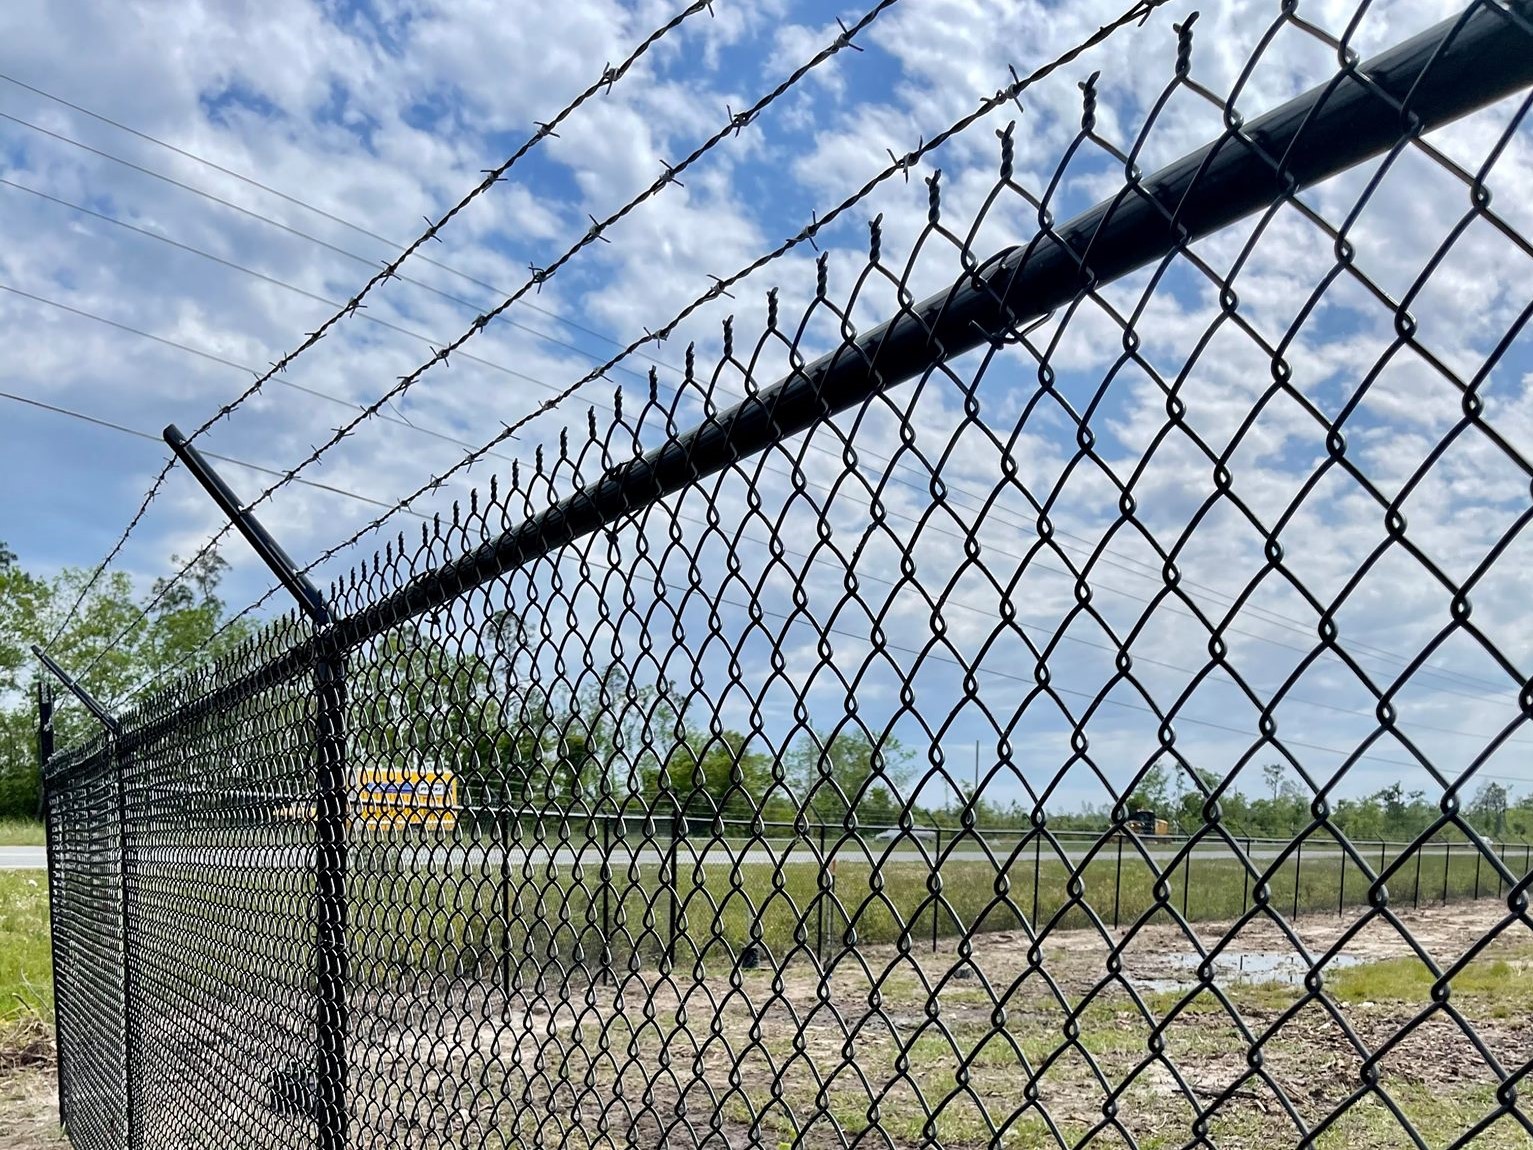 Photo of a black pvc coated chain link fence with barbed wire